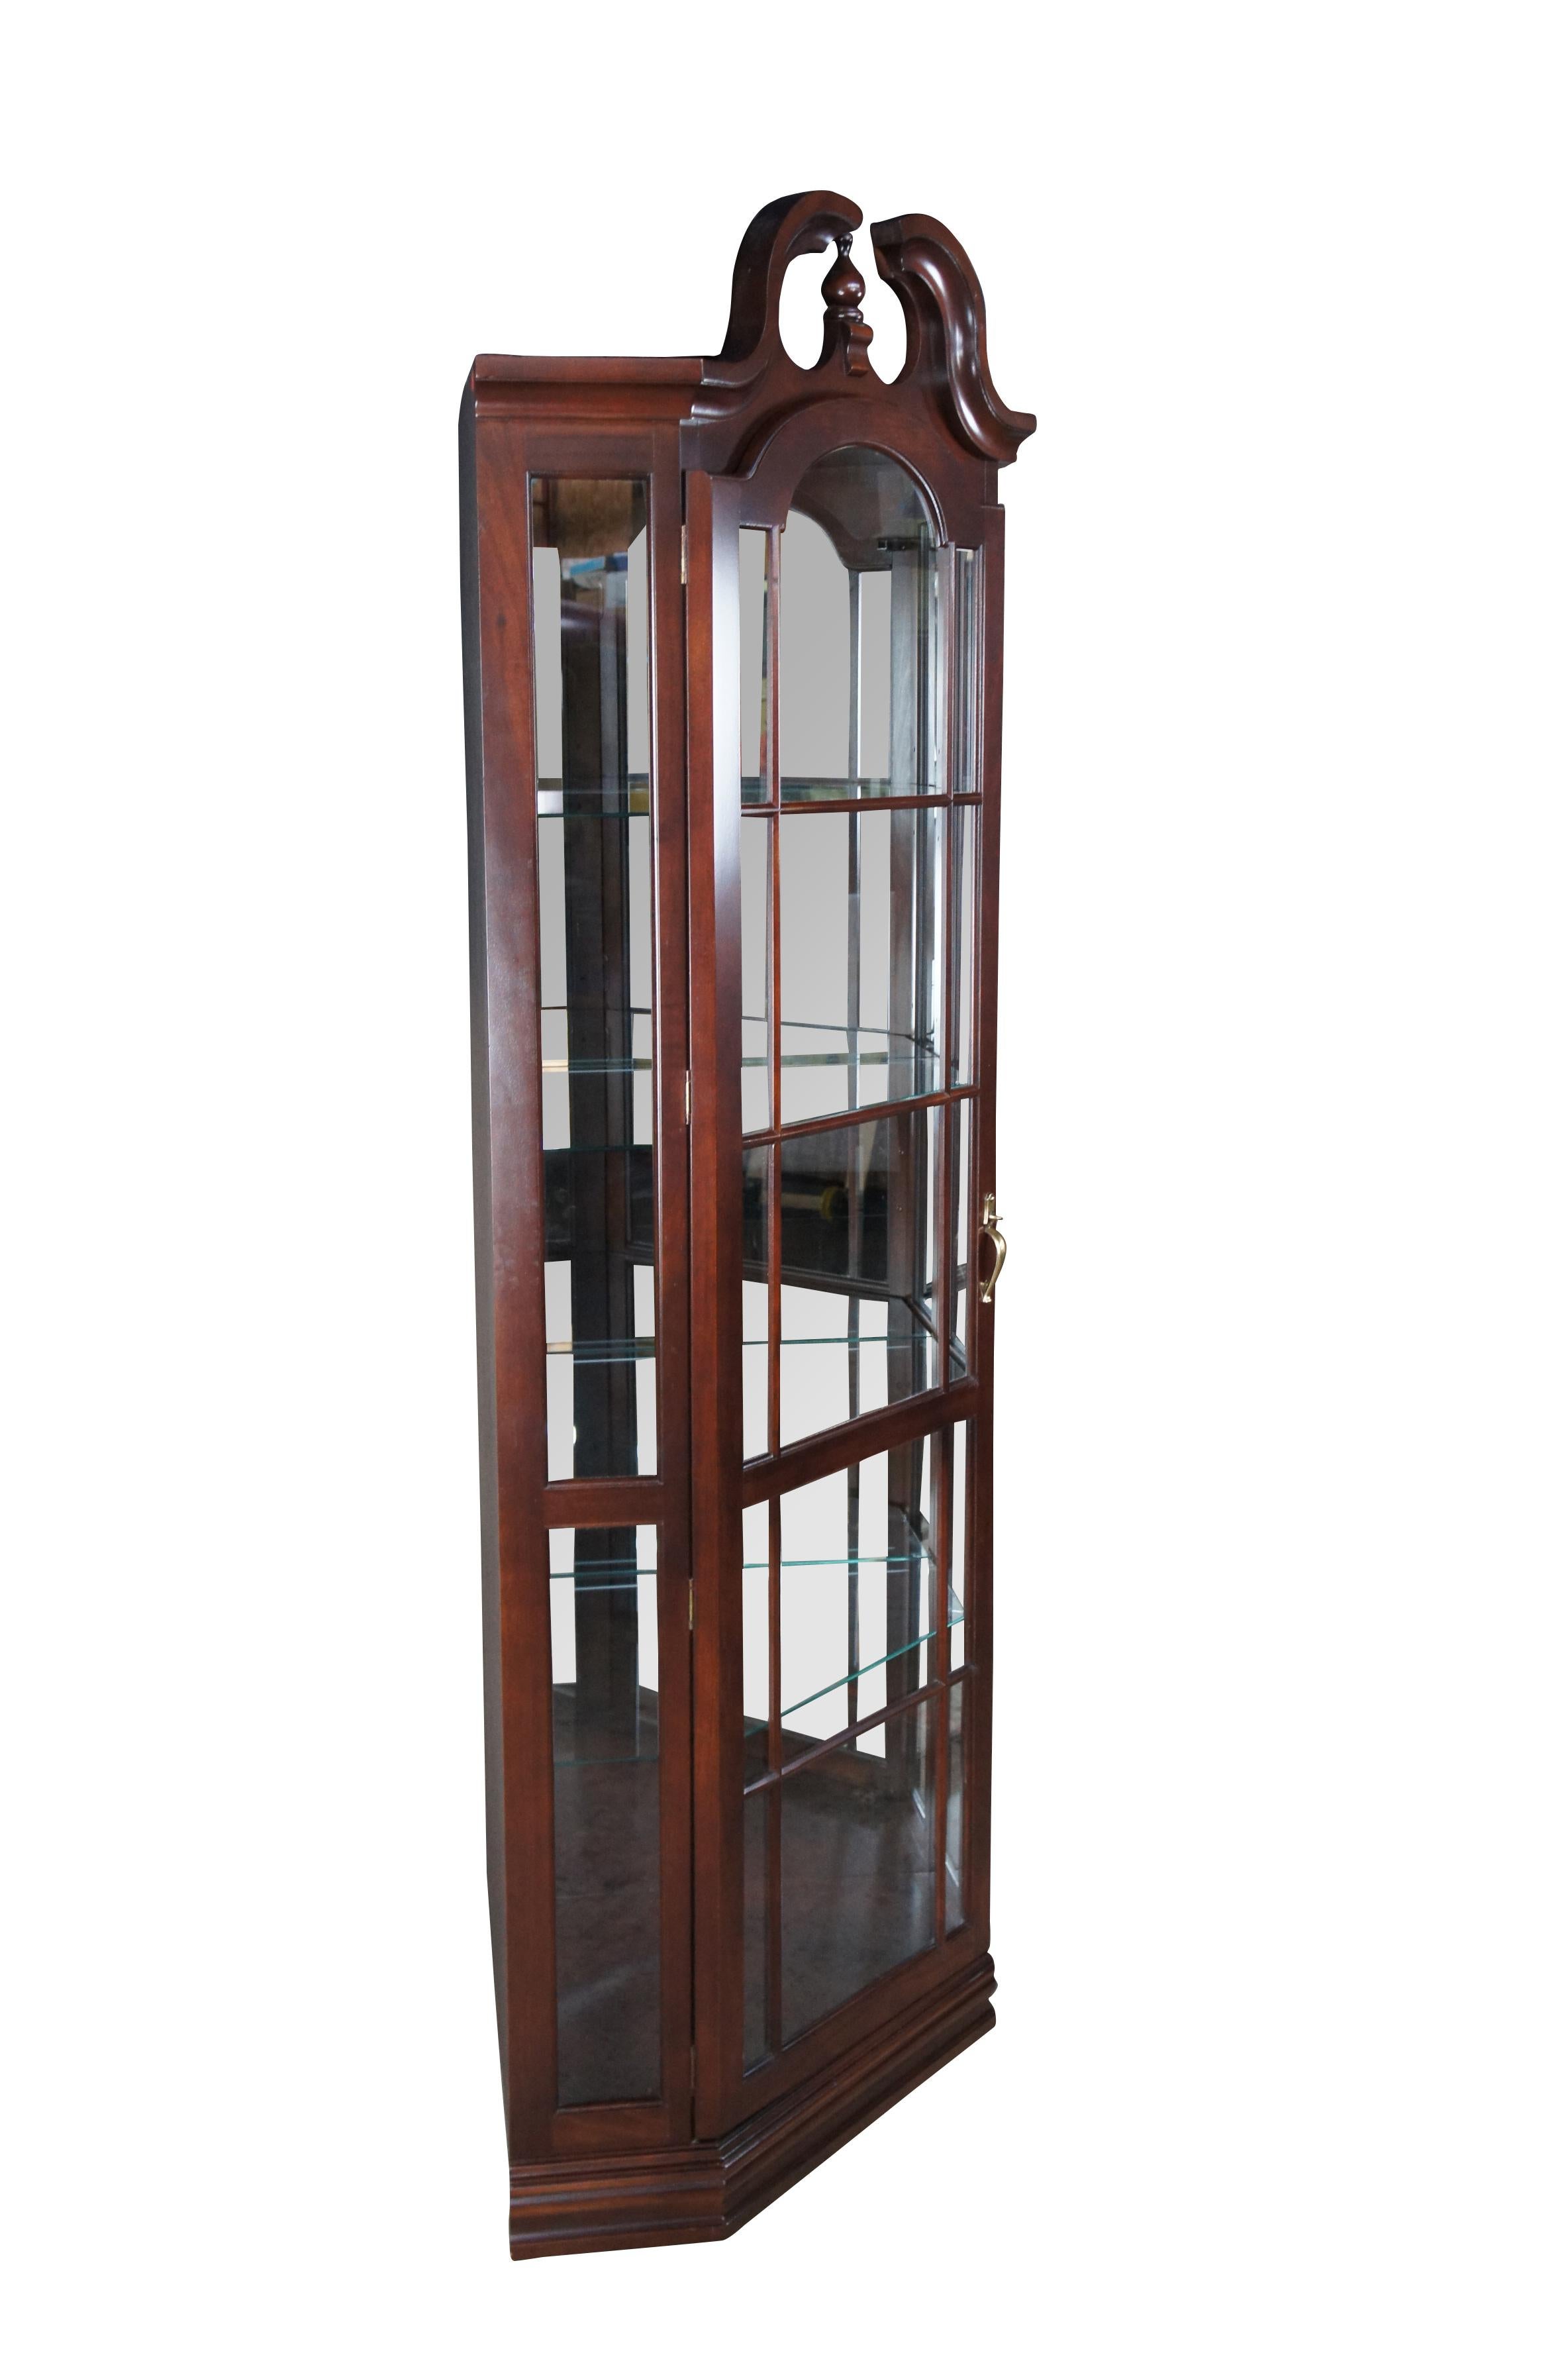 Philip Reinisch Queen Anne style corner display cabinet, circa 1990s.  Made from cherry with an open pediment and lattice front.  Opens to four adjustable glass shelves with plate grooves.

Founded in 1932 in Chicago Illinois, Philip Reinisch